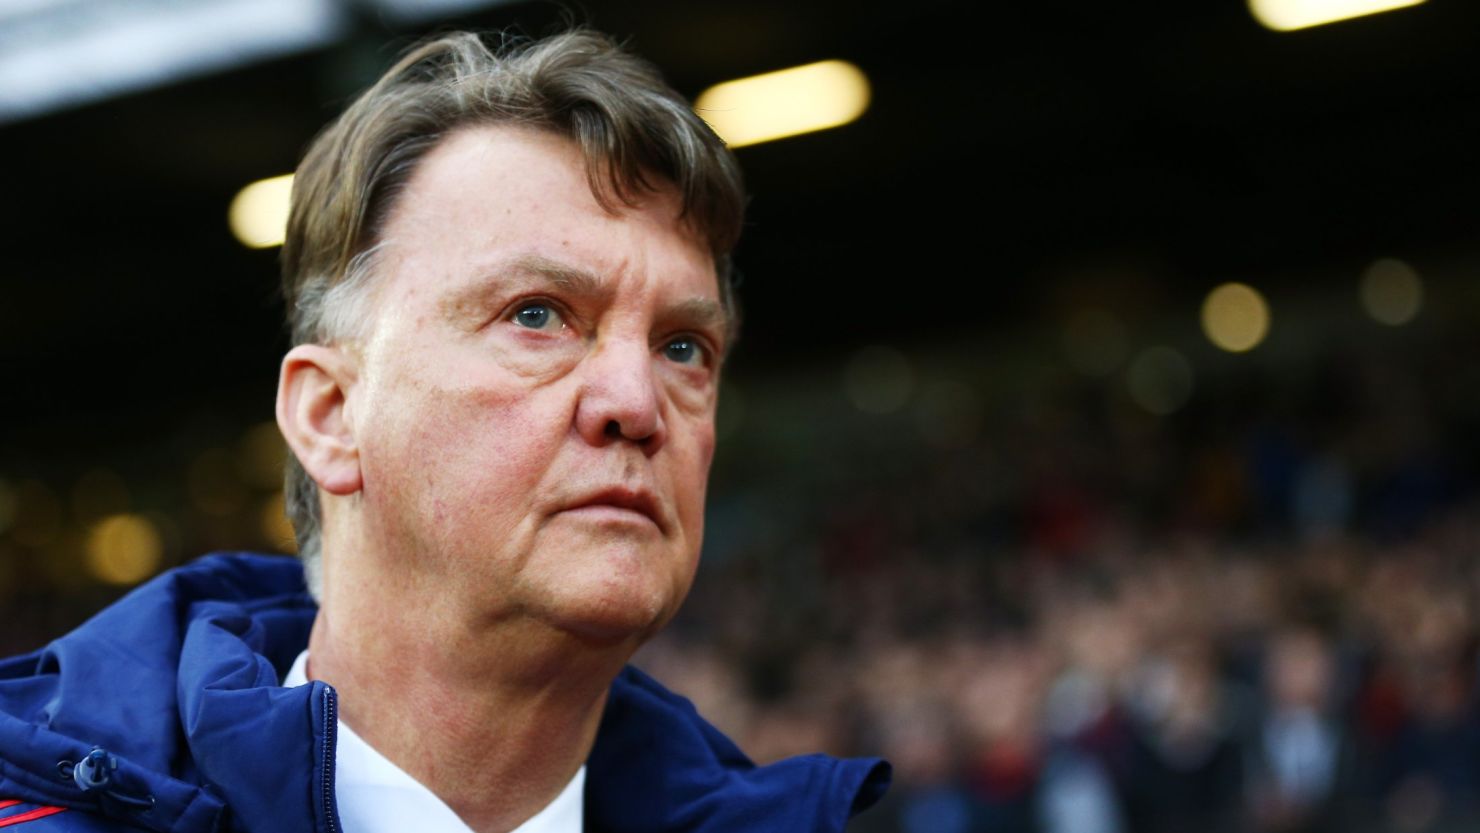 Louis van Gaal has been subjected to constant speculation about his Man Utd future.